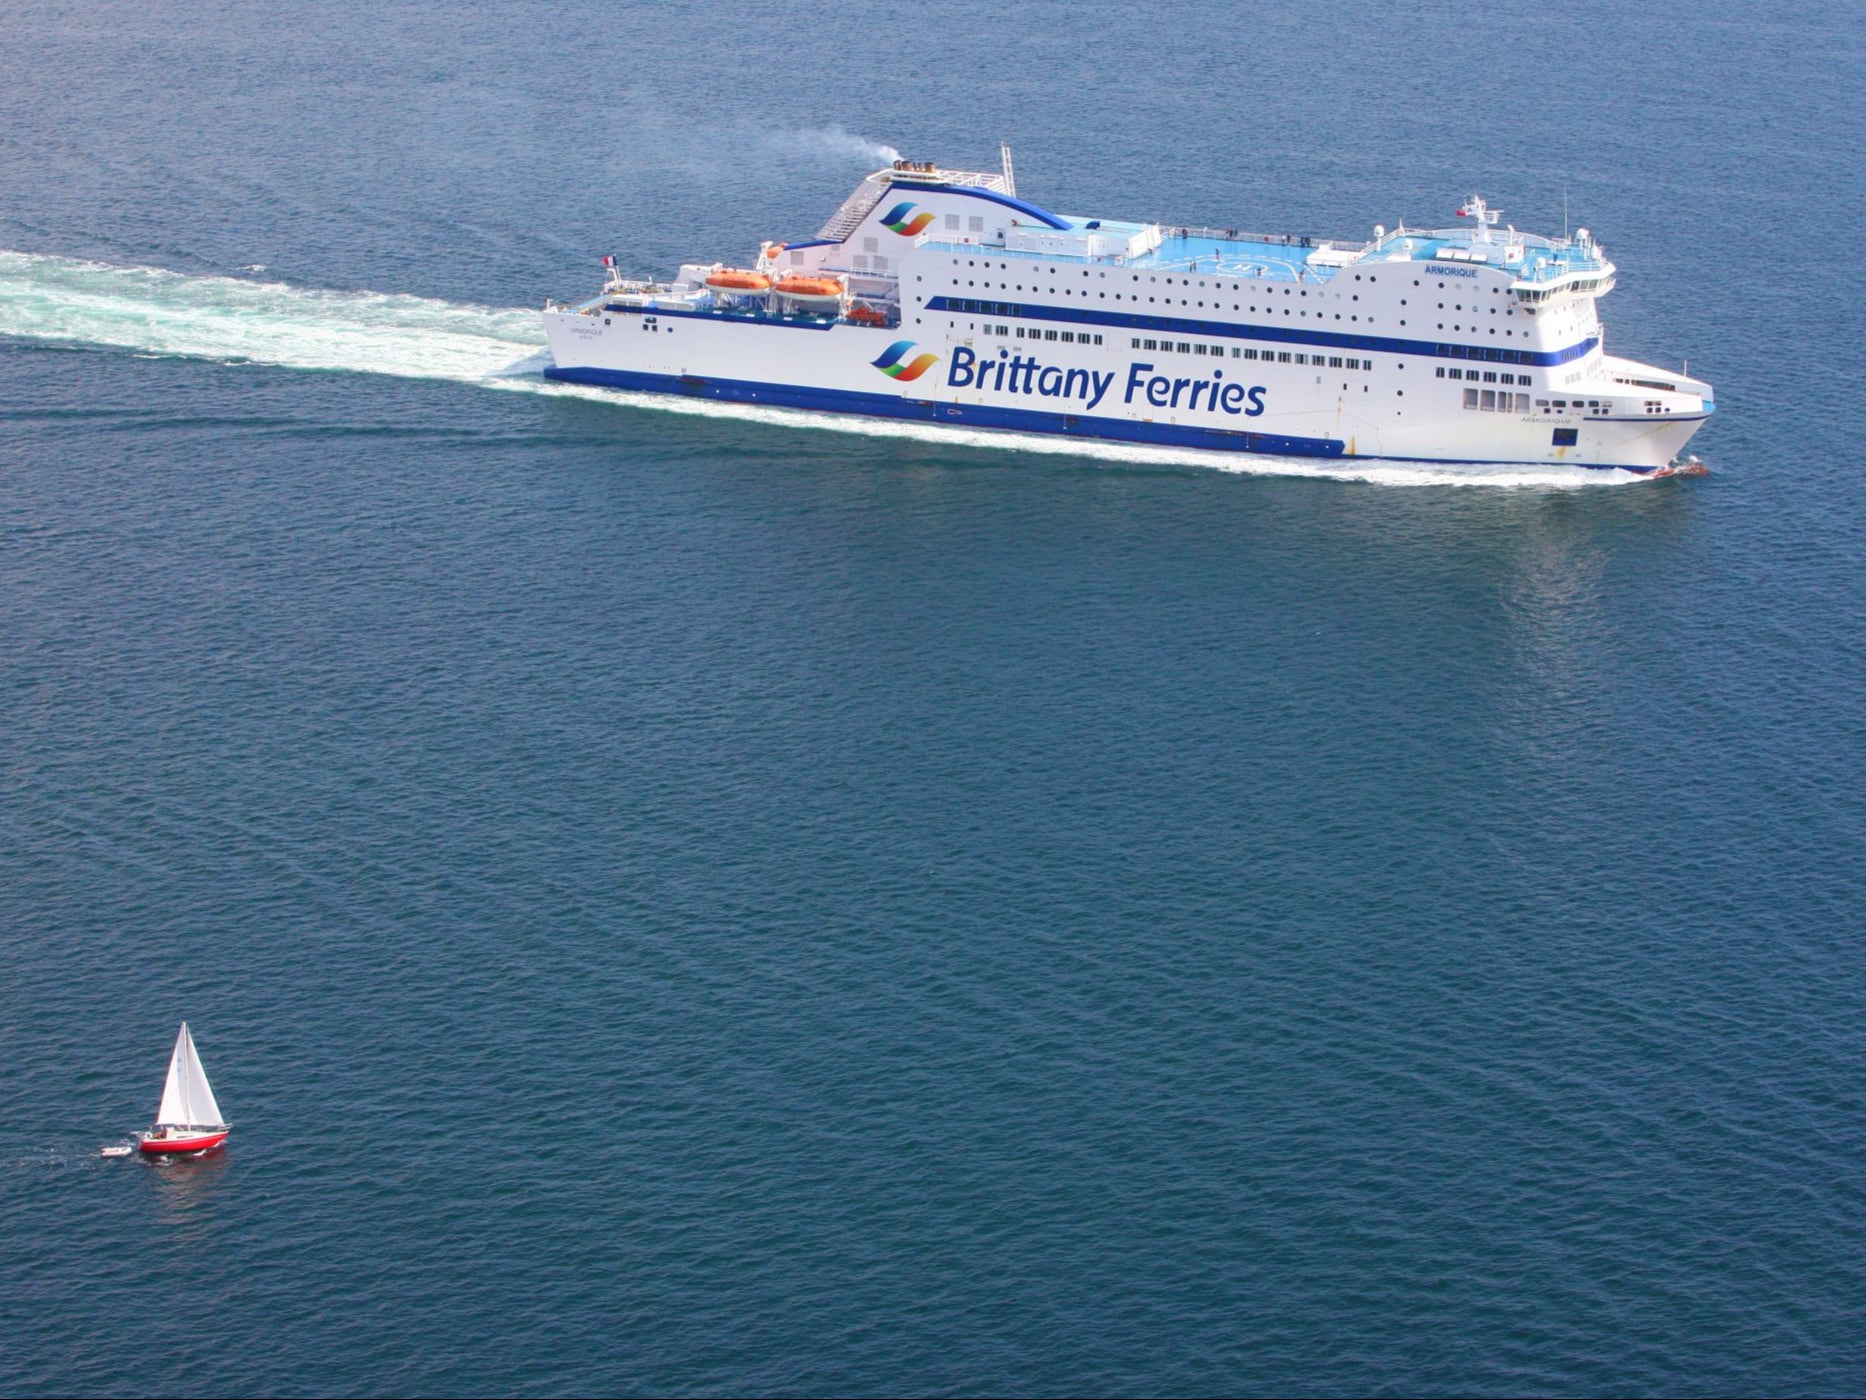 Plain sailing? The cross-Channel route from Brittany Ferries is running despite the riots